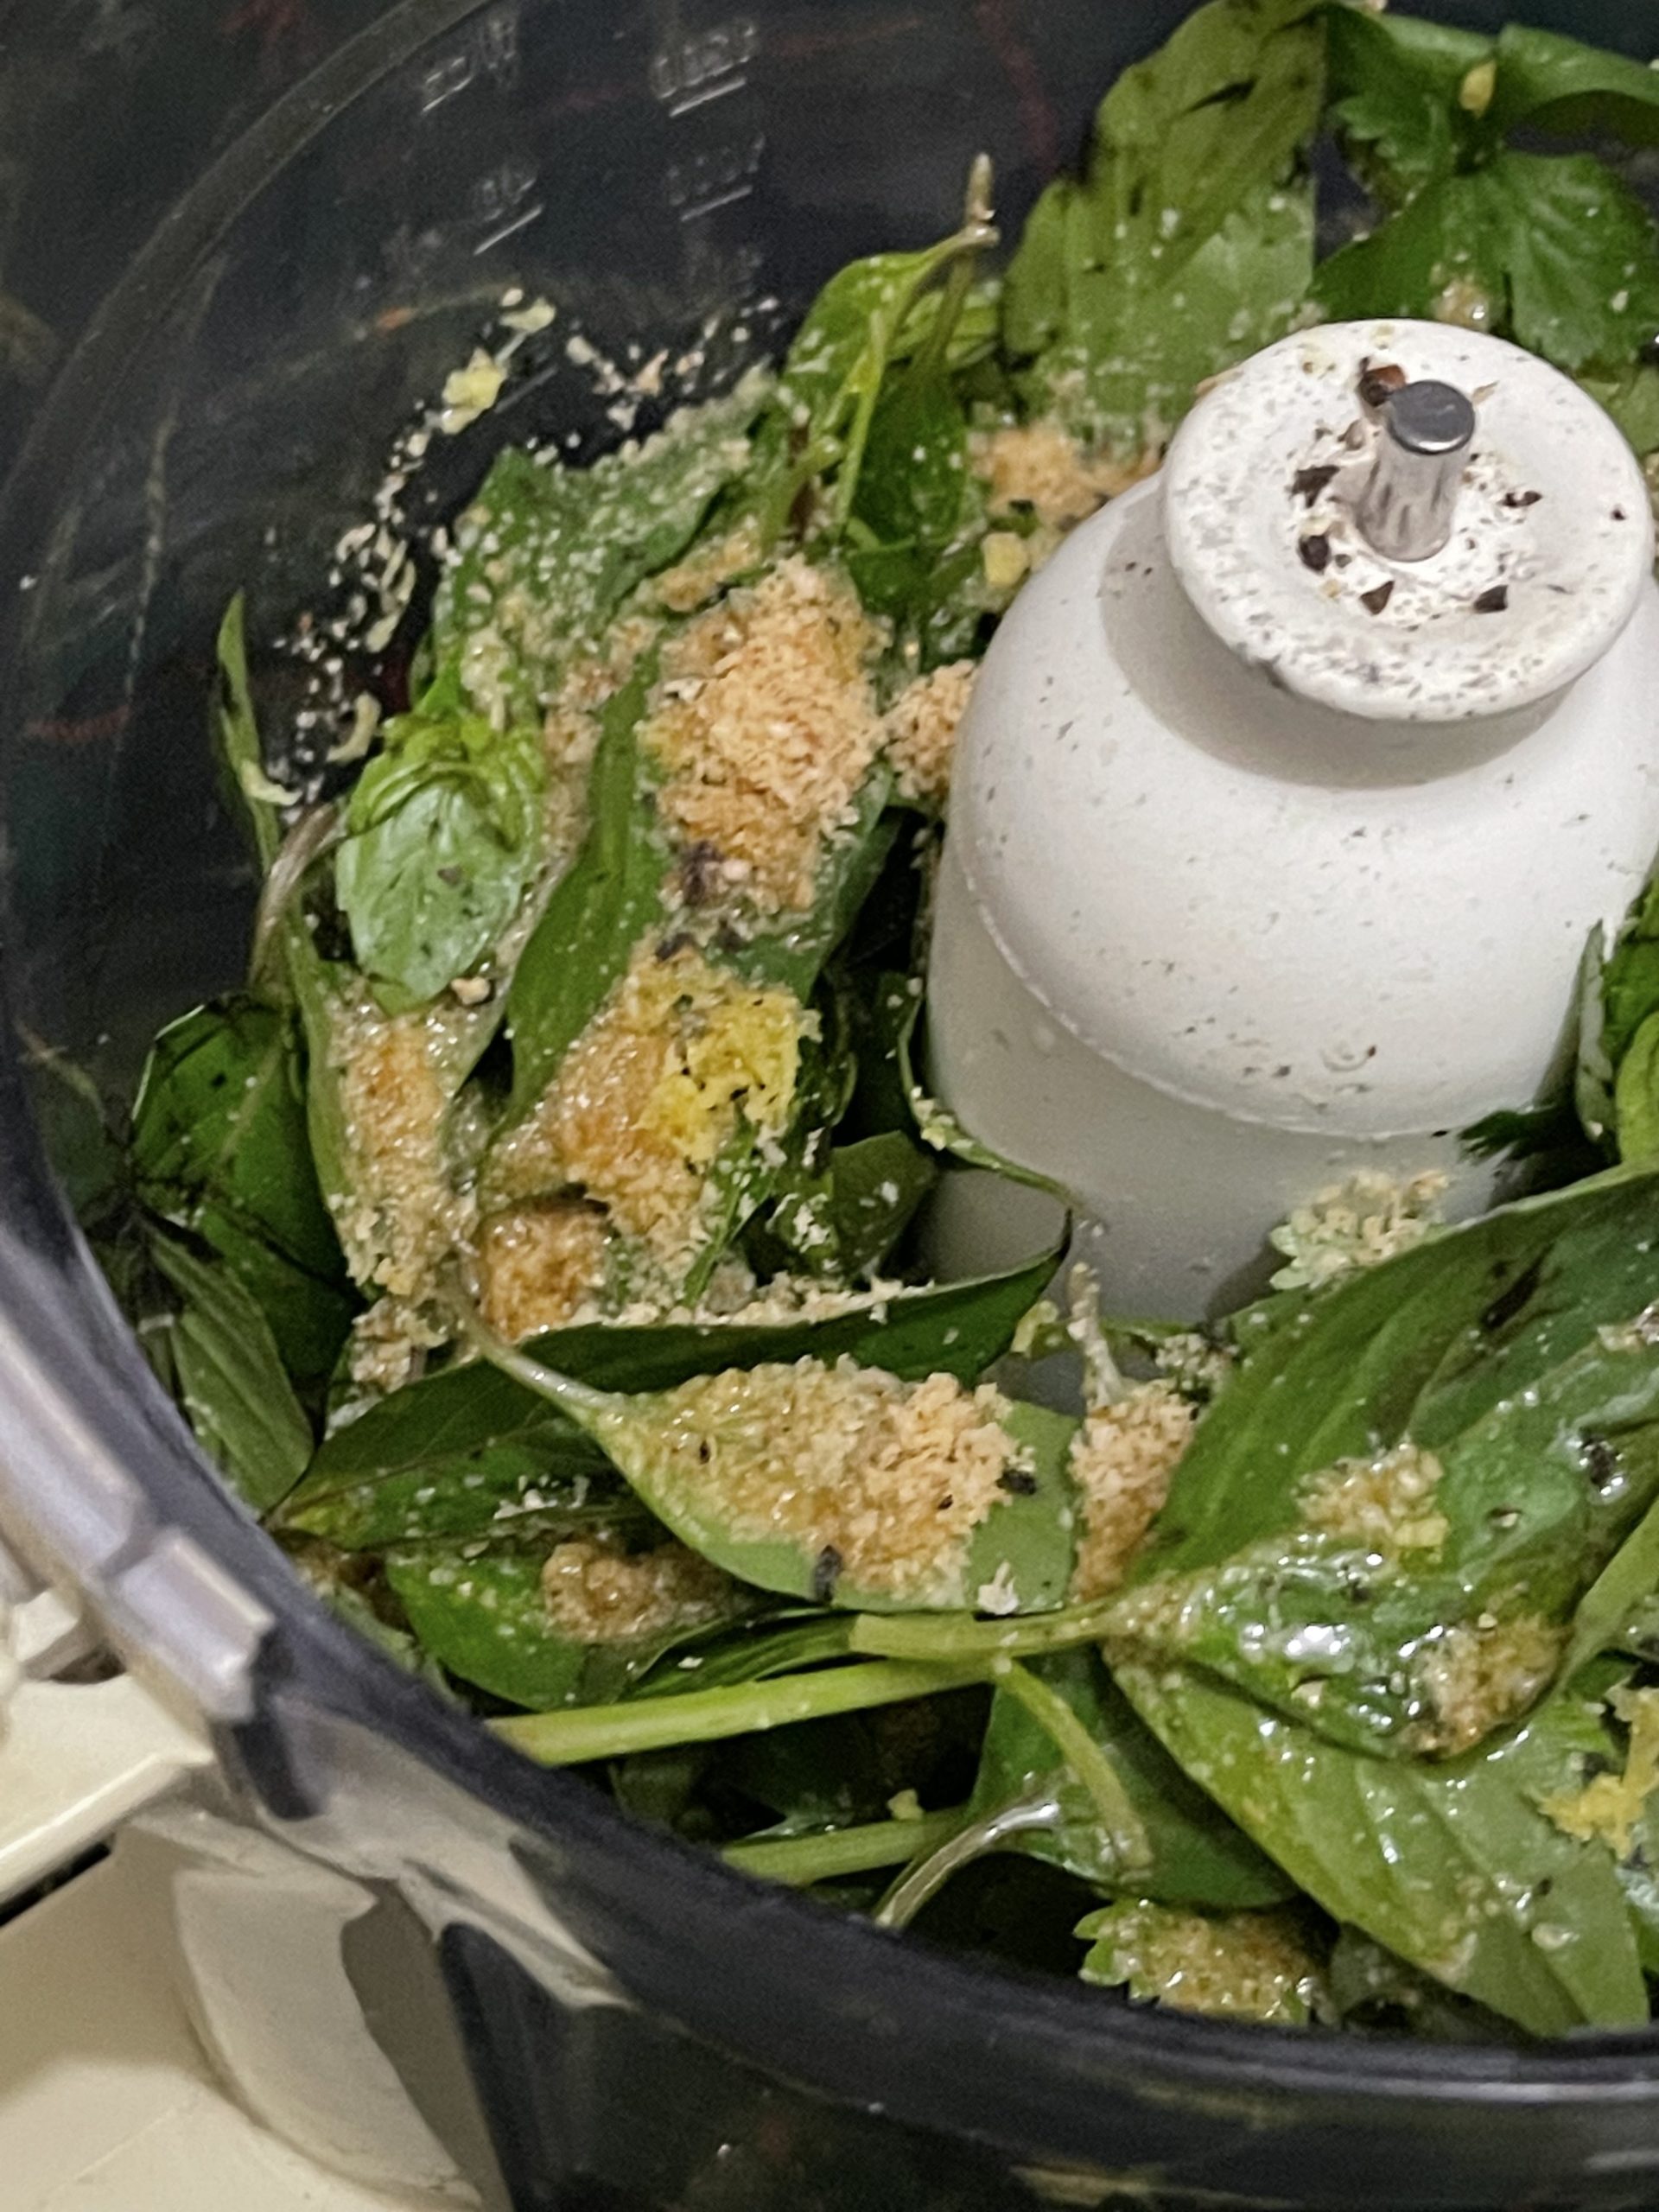 Spinach and seasonings in a food processor